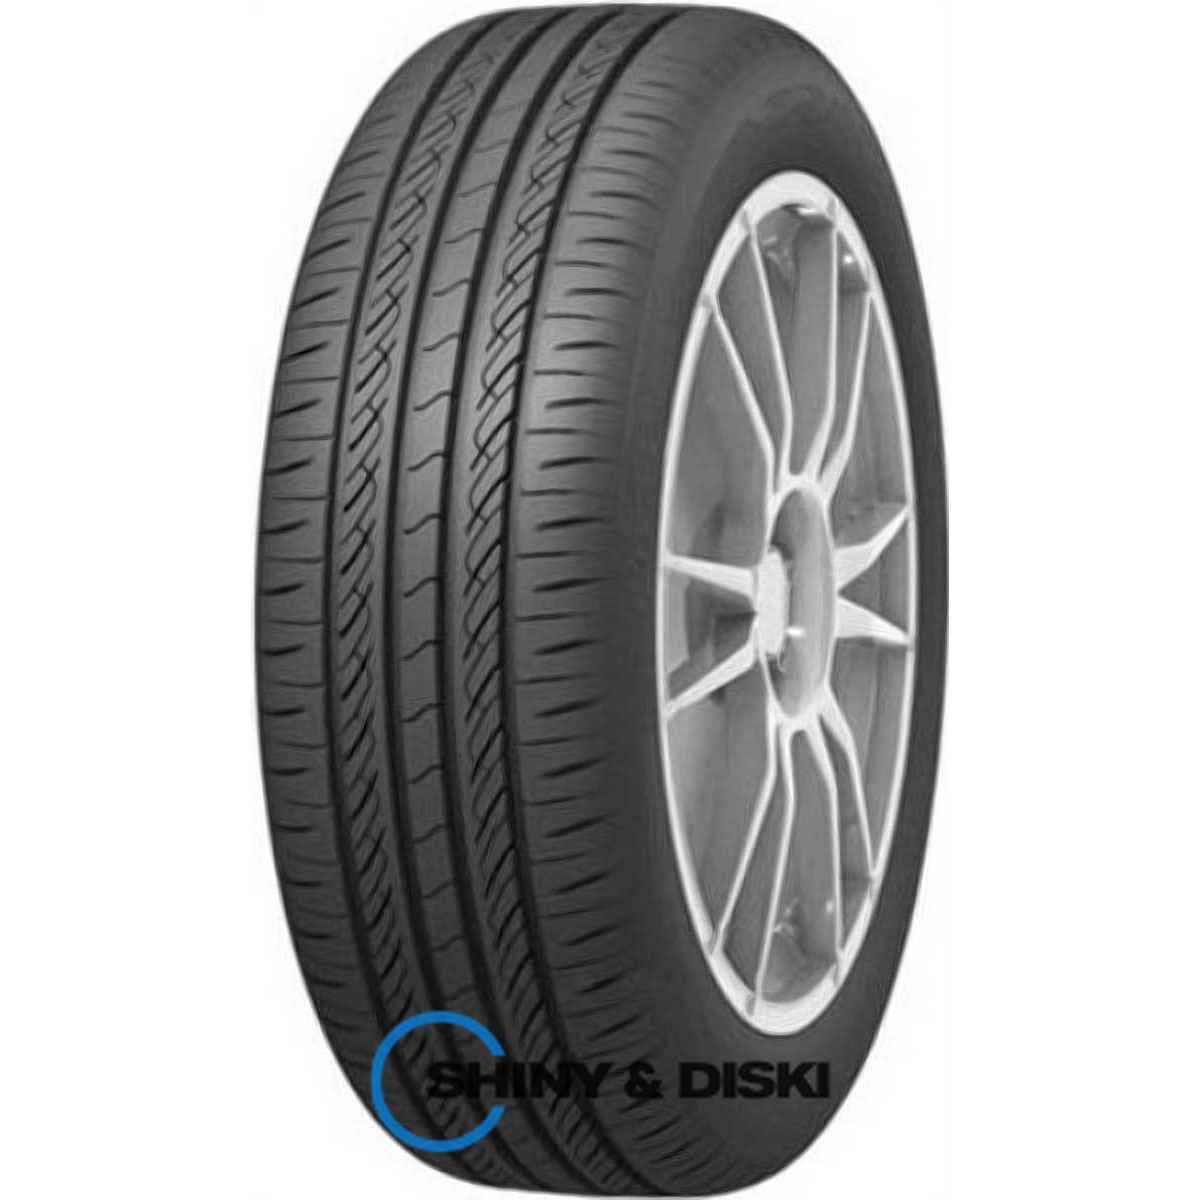 infinity ecosis 185/65 r15 88h